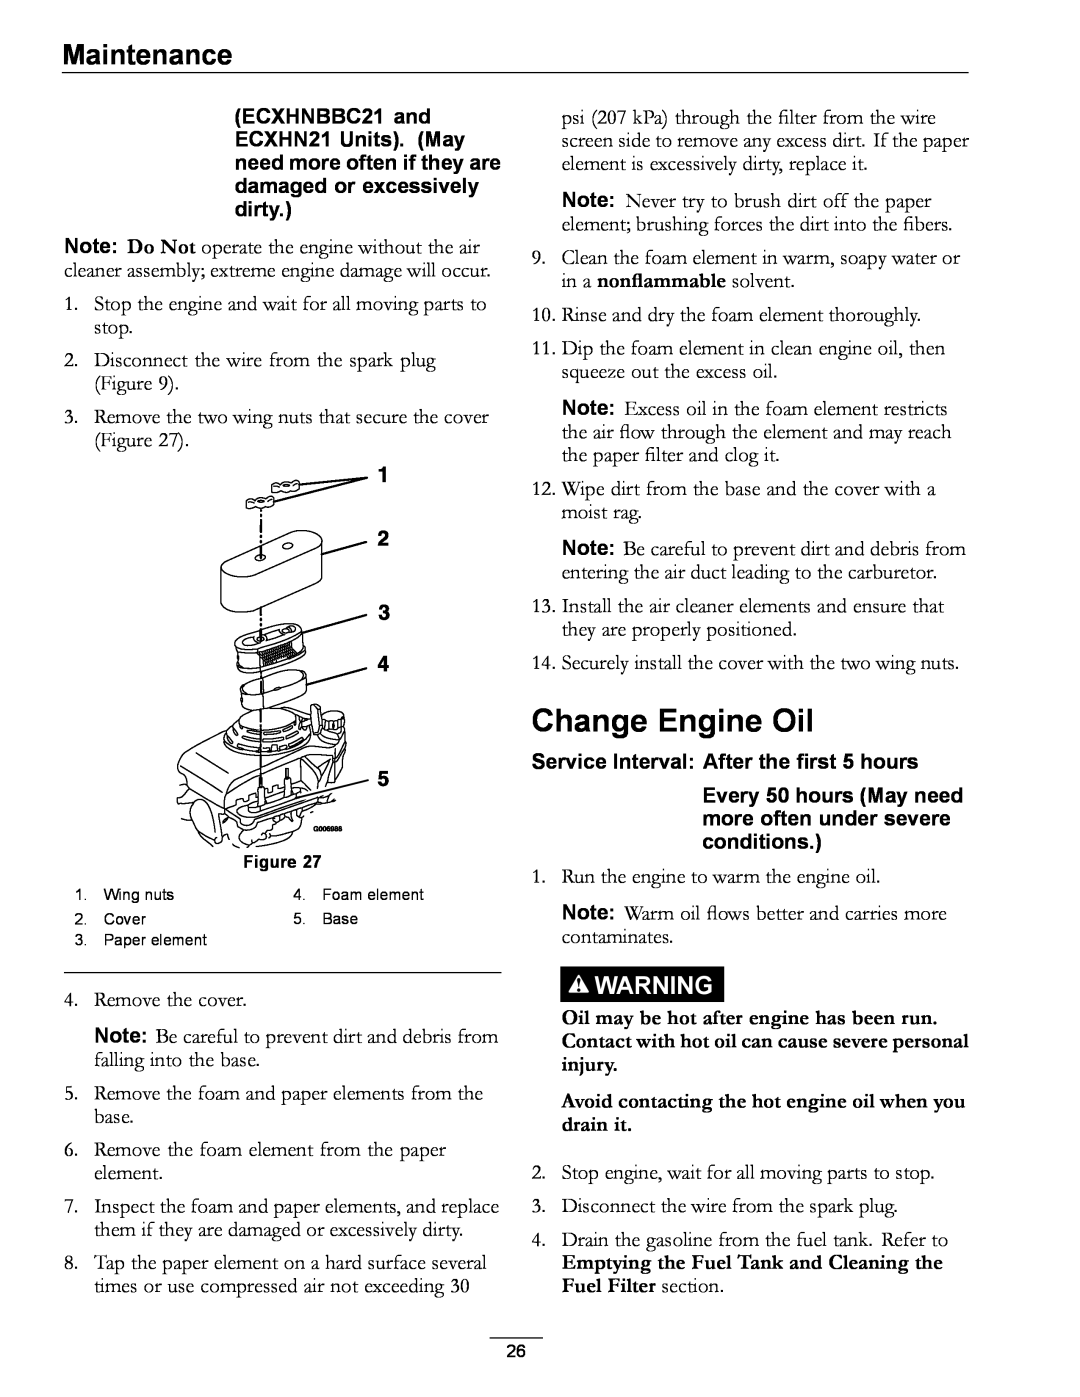 Exmark COMMERCIAL 21 manual Change Engine Oil, Service Interval After the first 5 hours, Maintenance 